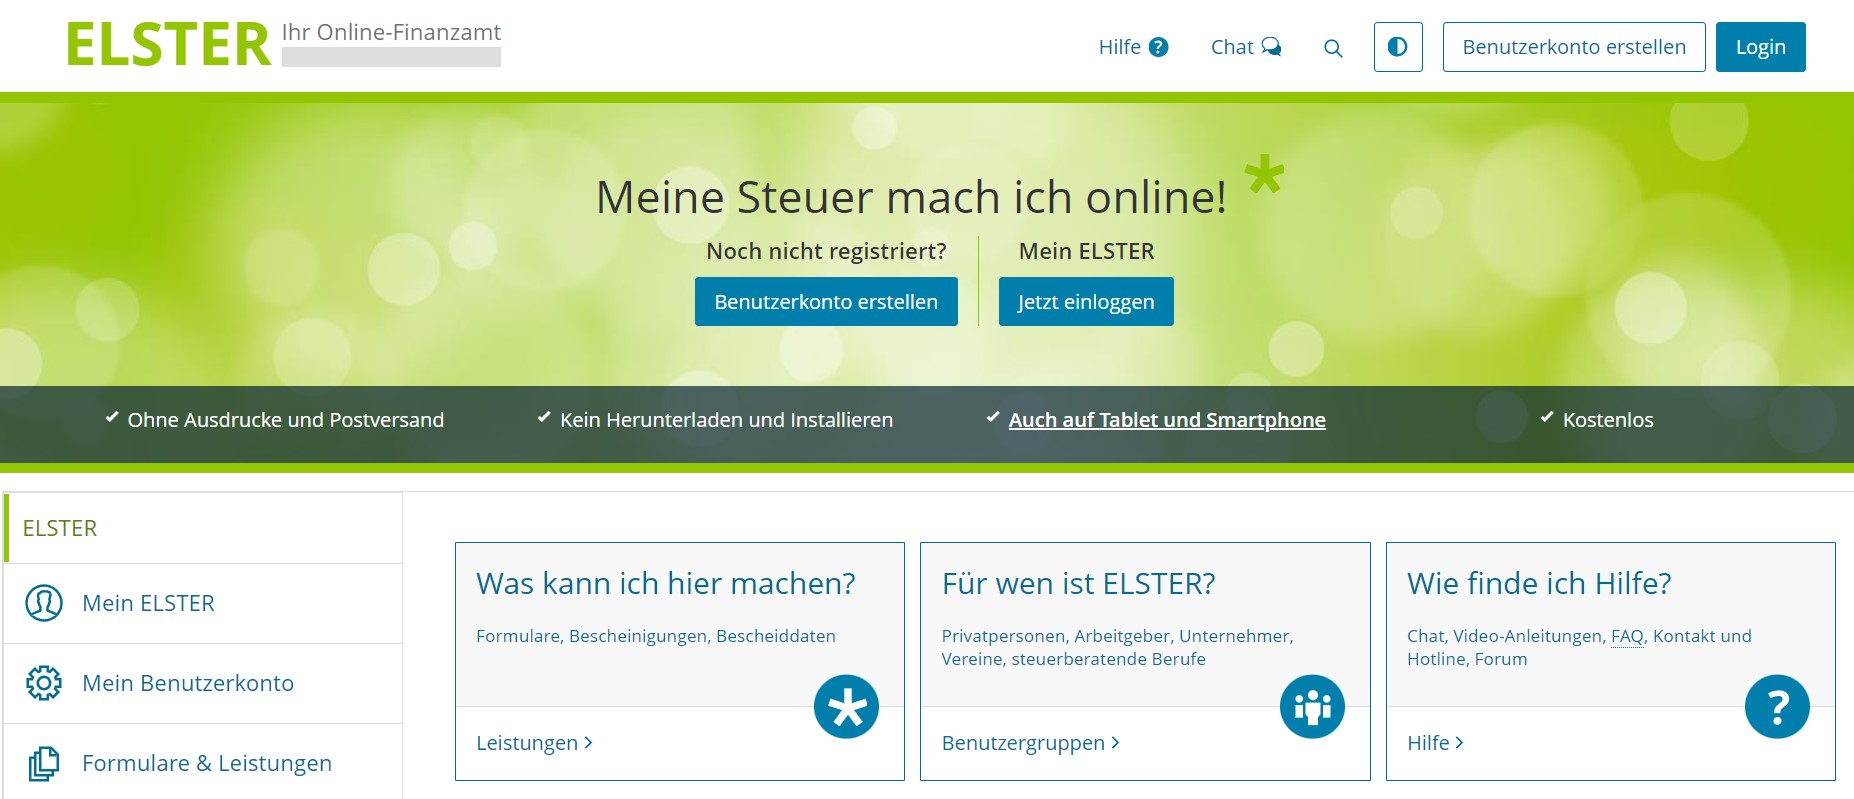 Elster Tax Return Softwares in Germany